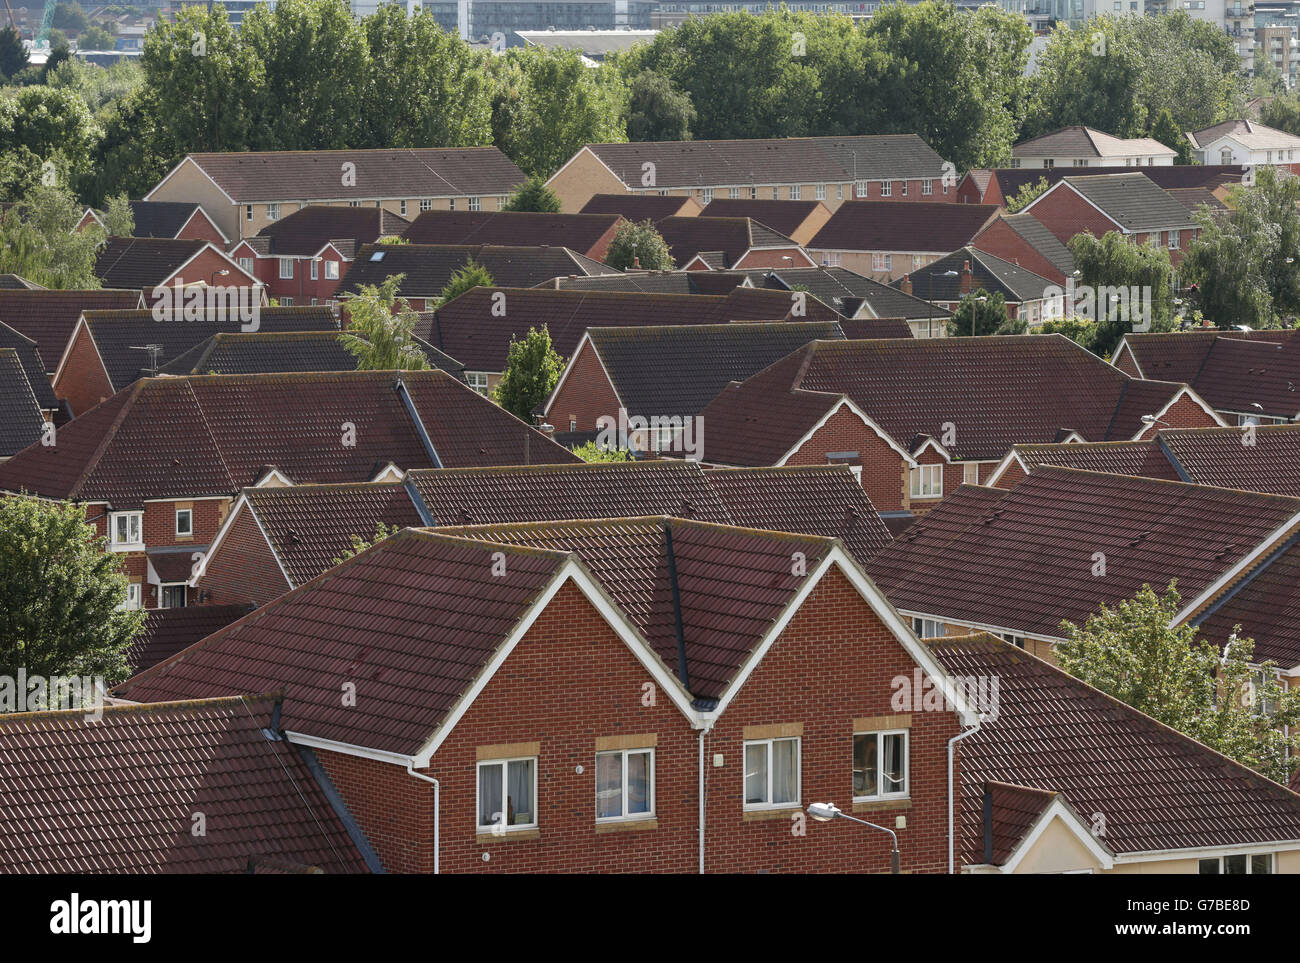 House prices. A view of houses in Thamesmead, south east London. Stock Photo